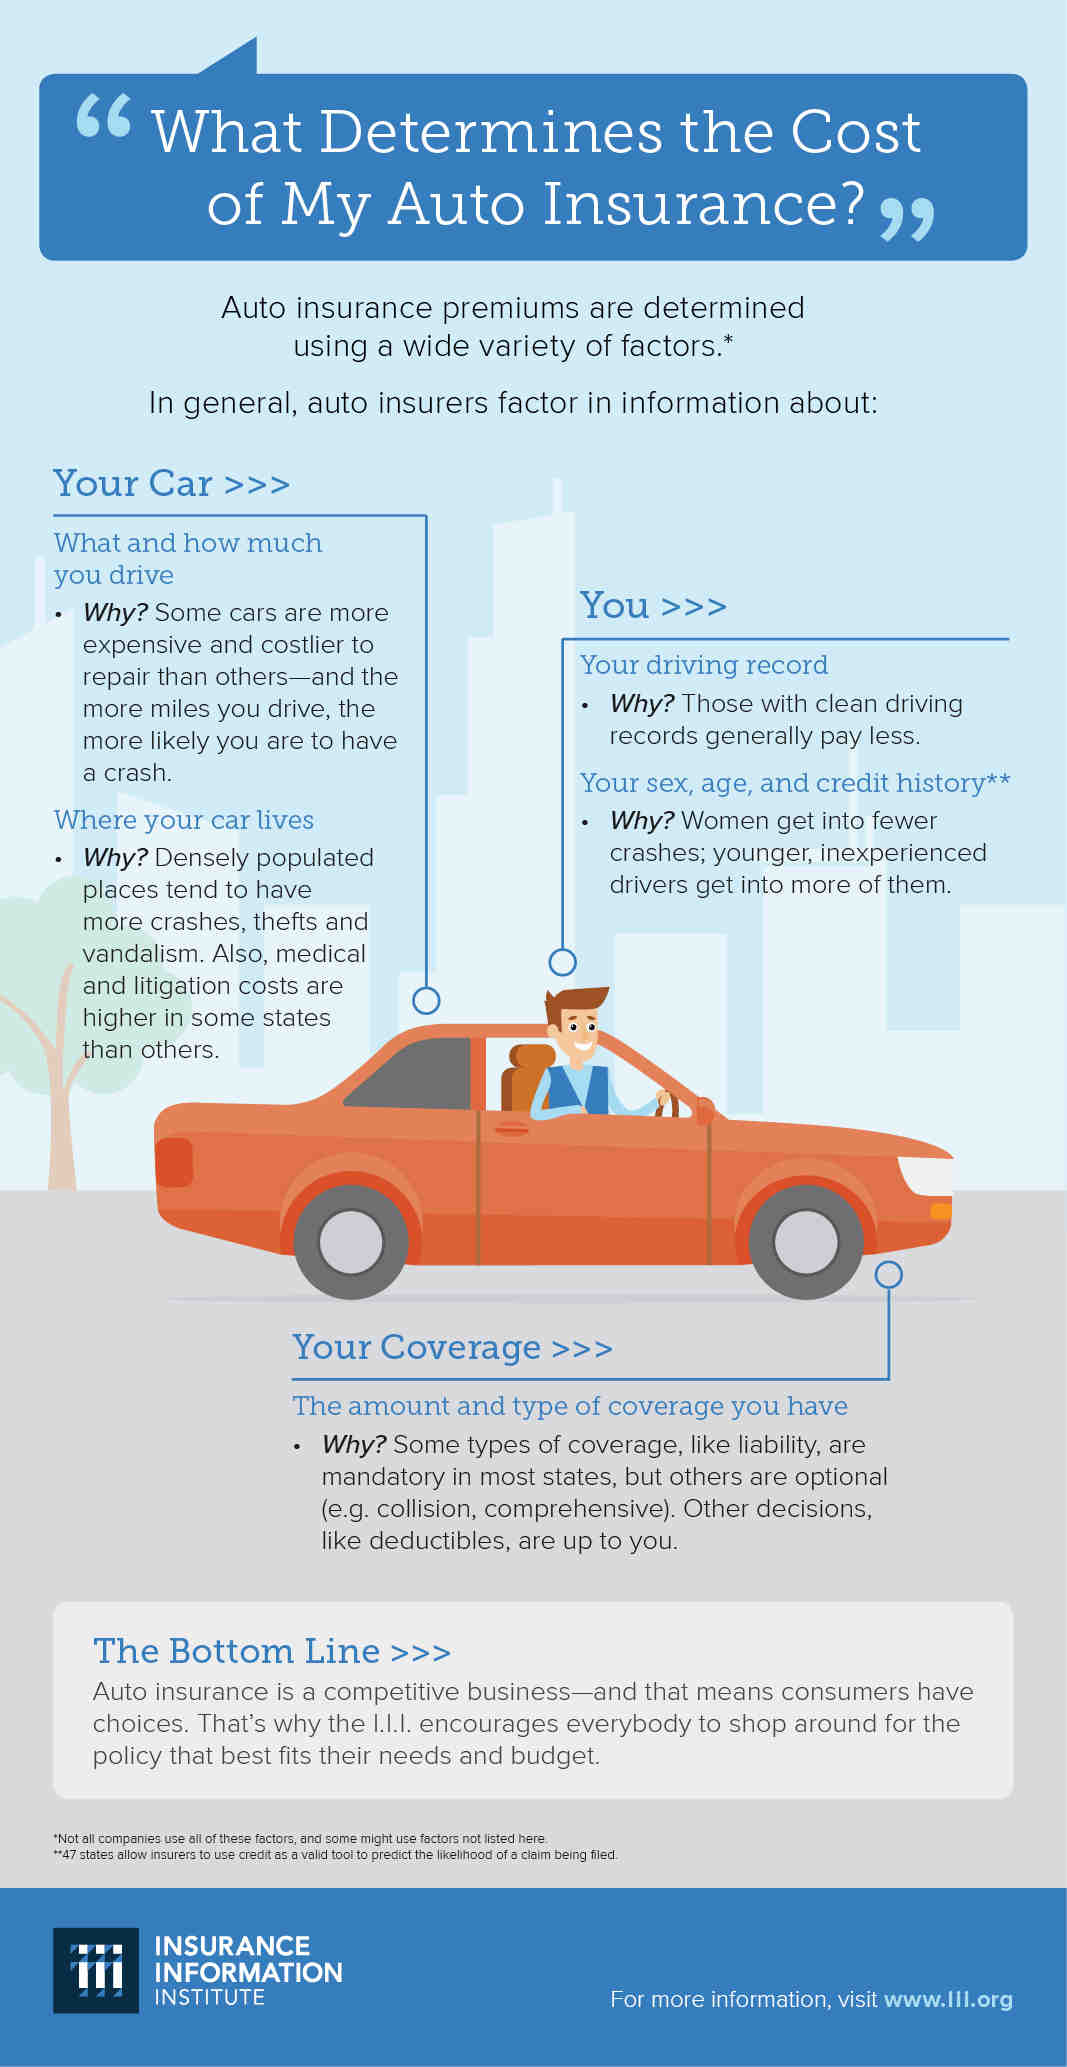 What type of car insurance is the most important?